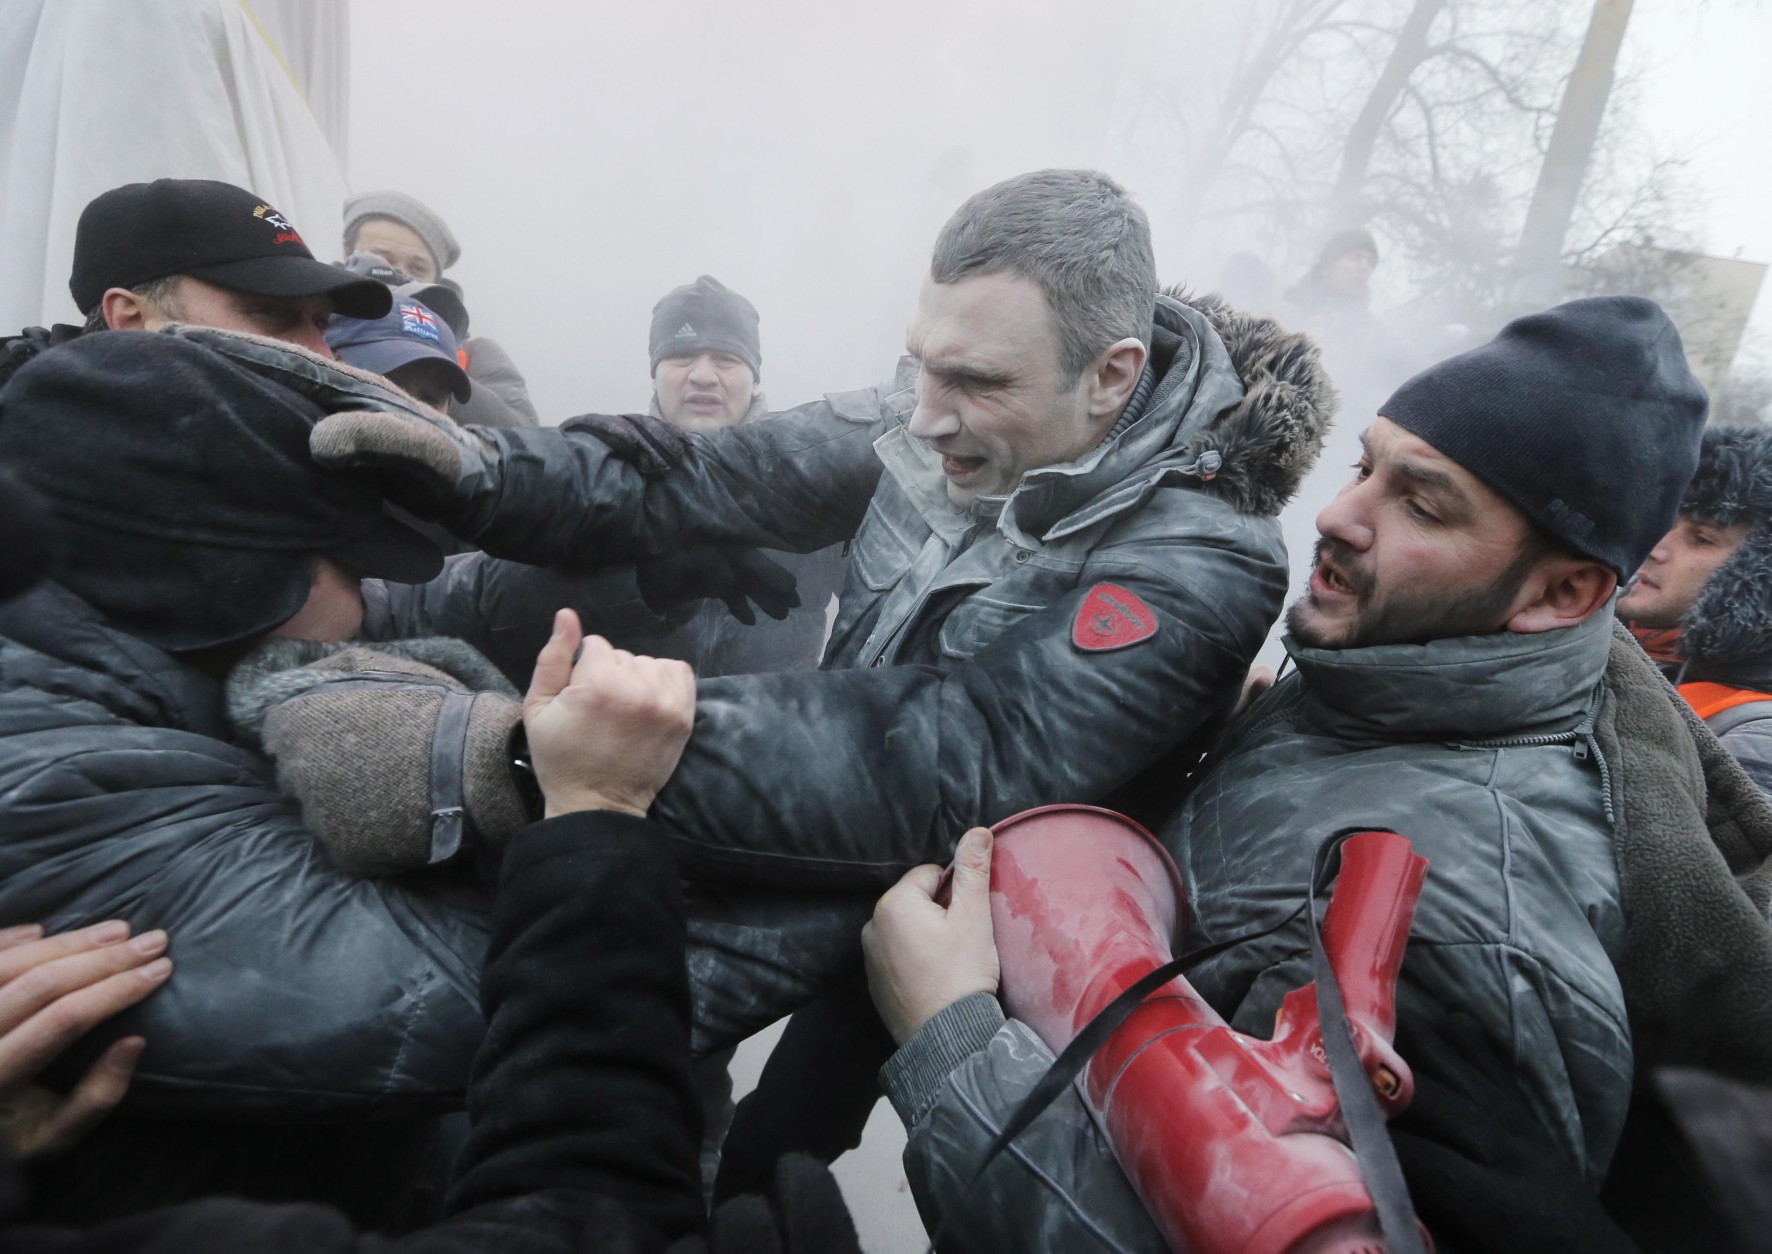 FOR USE AS DESIRED, YEAR END PHOTOS - FILE - Opposition leader and former WBC heavyweight boxing champion Vitali Klitschko, center, is attacked and sprayed with a fire extinguisher as he tries to stop the clashes between police and protesters  in central Kiev, Ukraine, Sunday, Jan. 19, 2014. (AP Photo/Efrem Lukatsky, File)